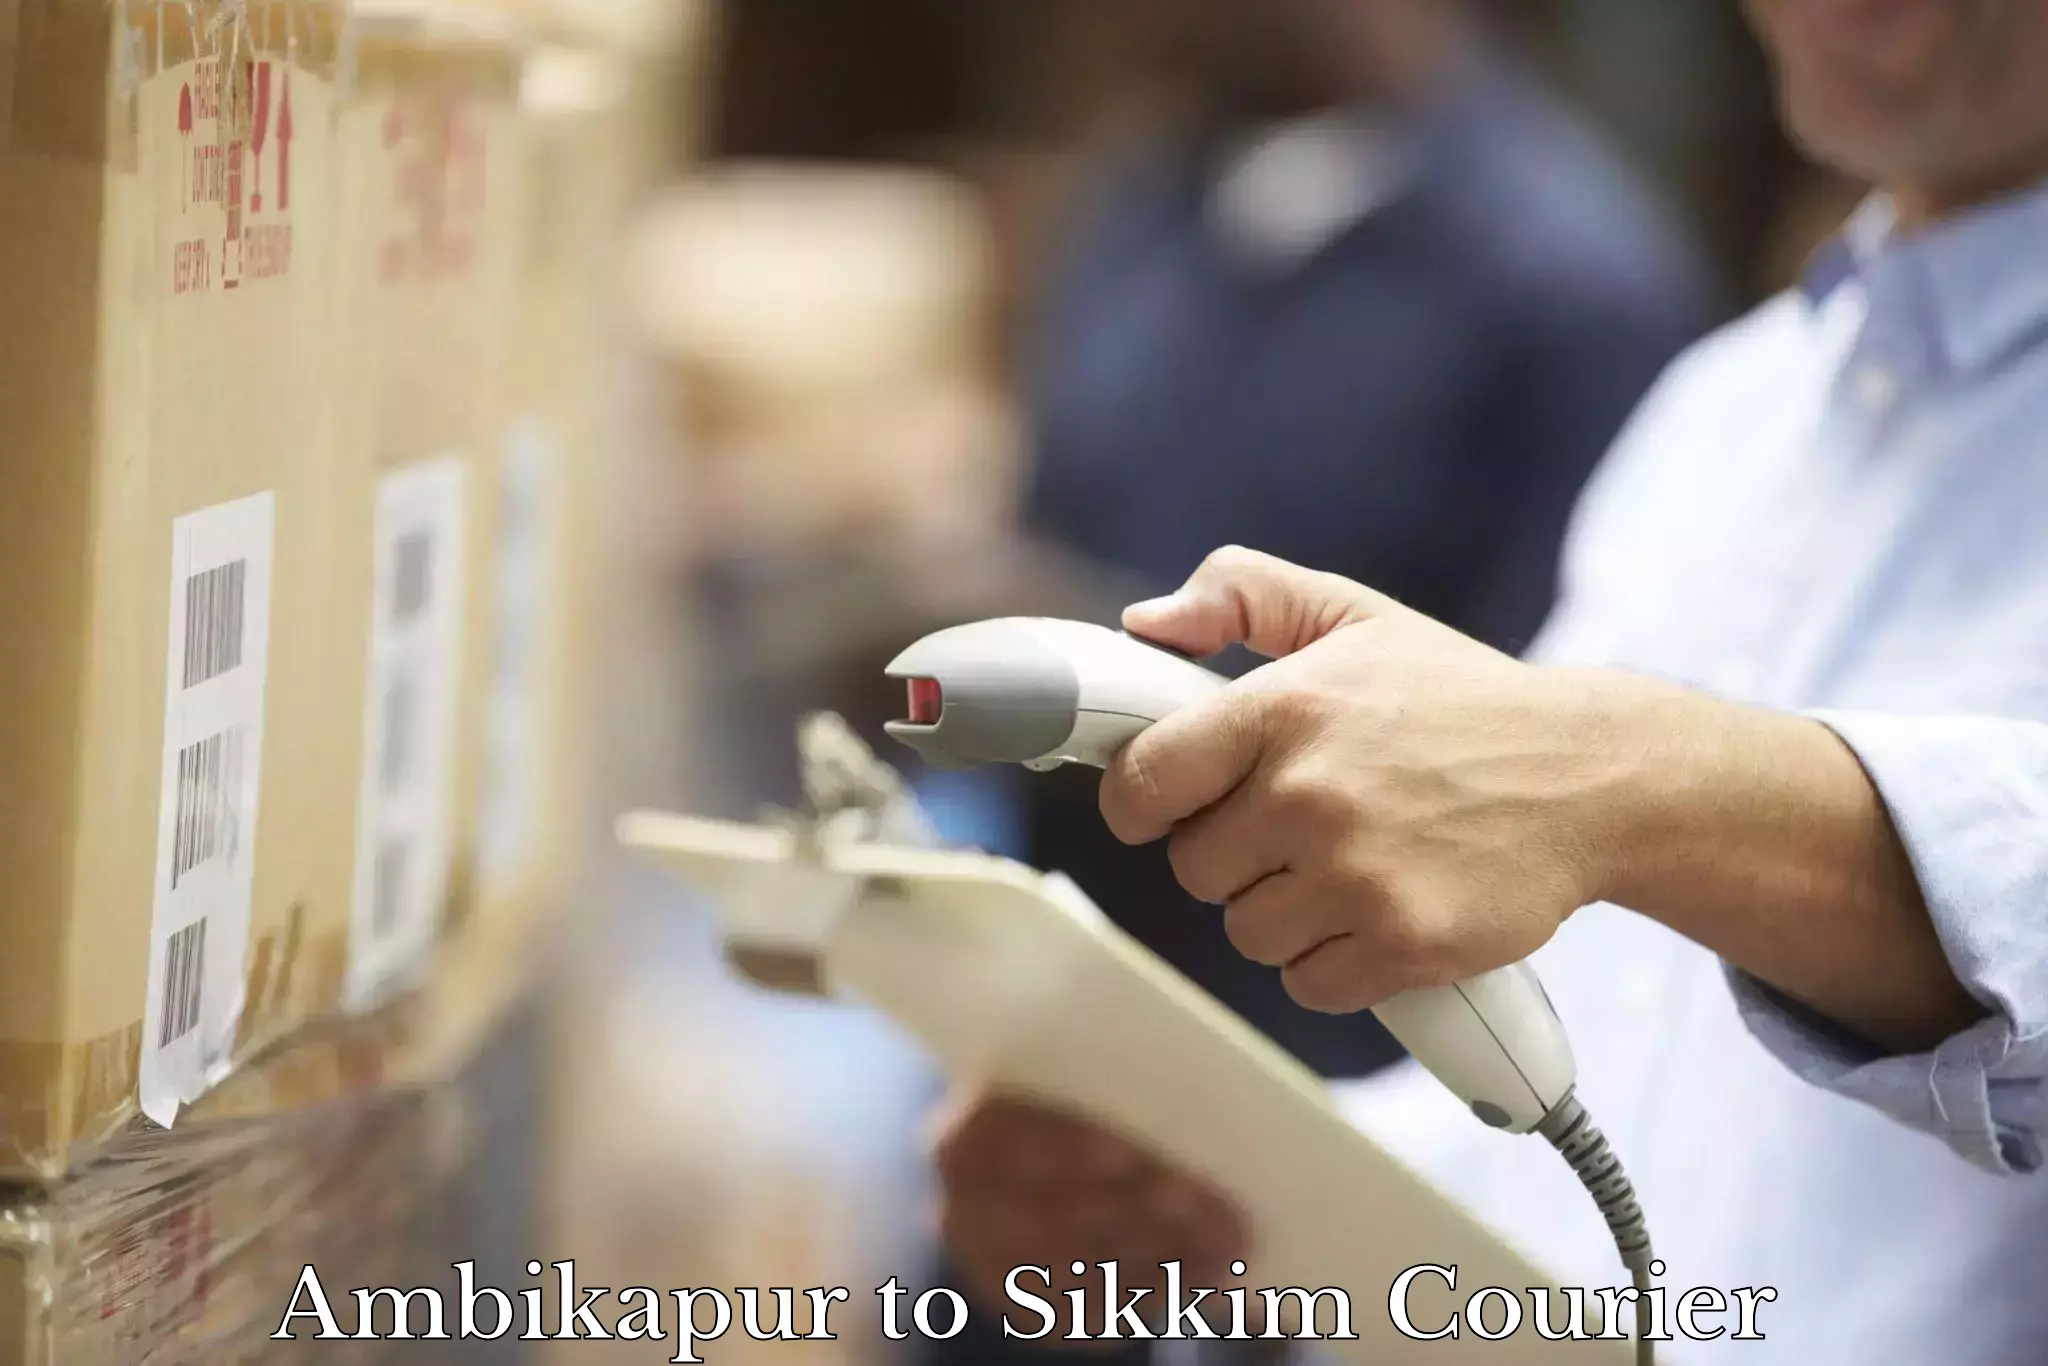 User-friendly delivery service Ambikapur to East Sikkim